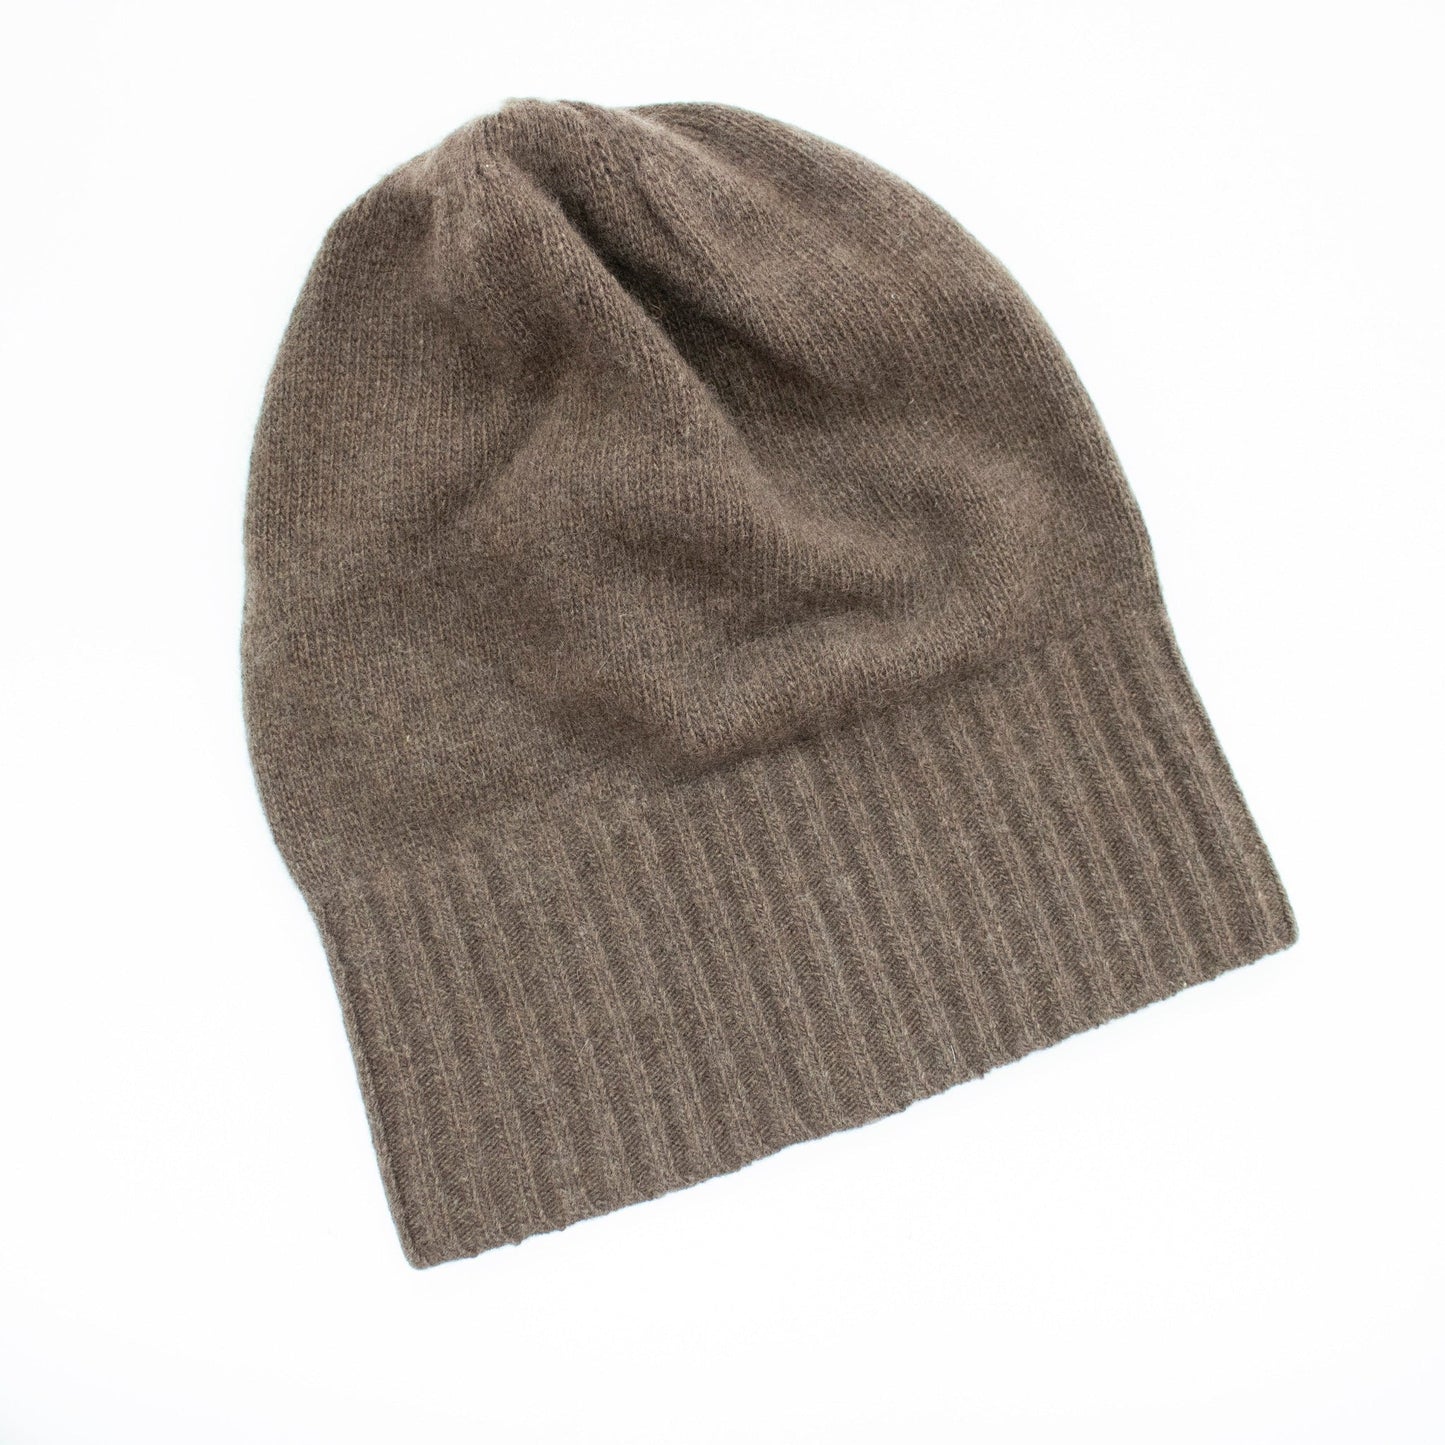 MEN'S CASHMERE SLOUCHY HAT - Scarvesnthangs